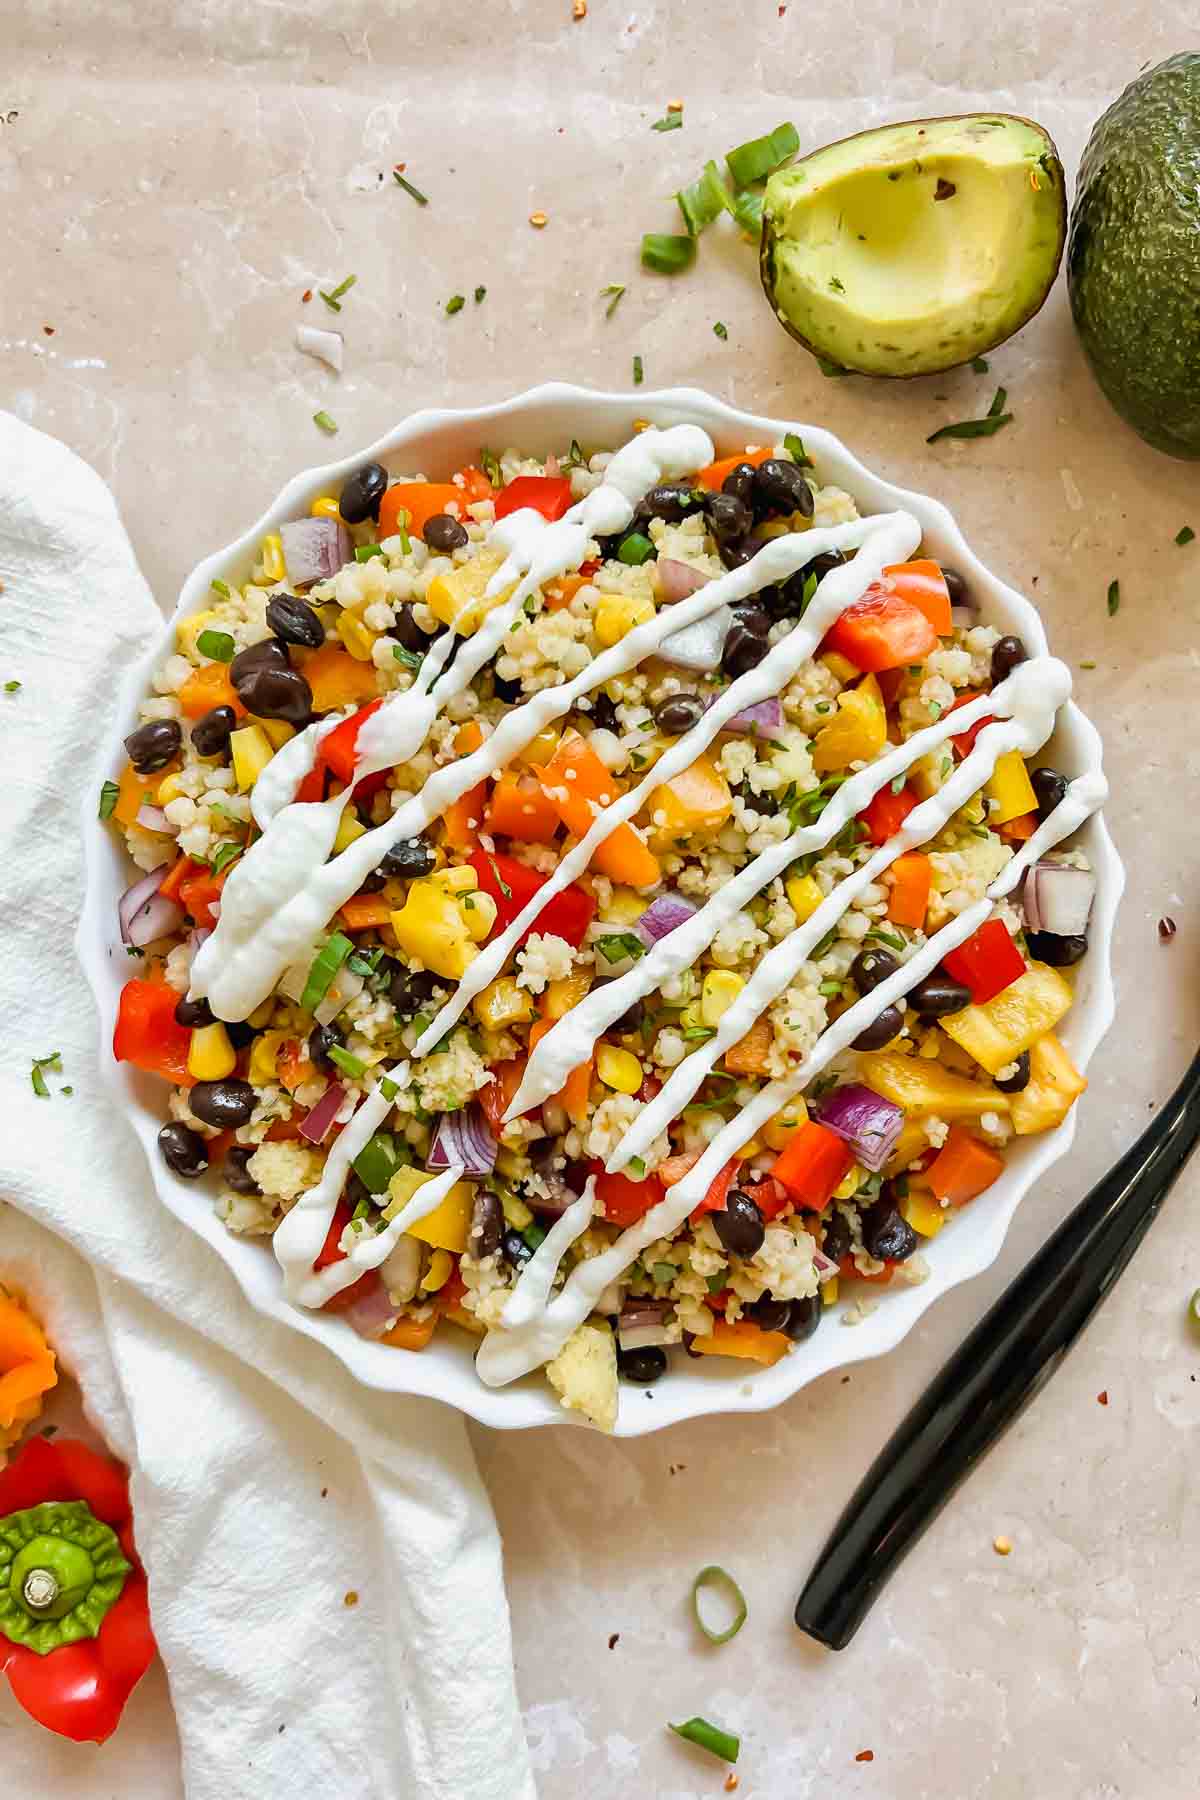 black bean couscous salad topped with fresh mexican crema in a white ceramic bowl.